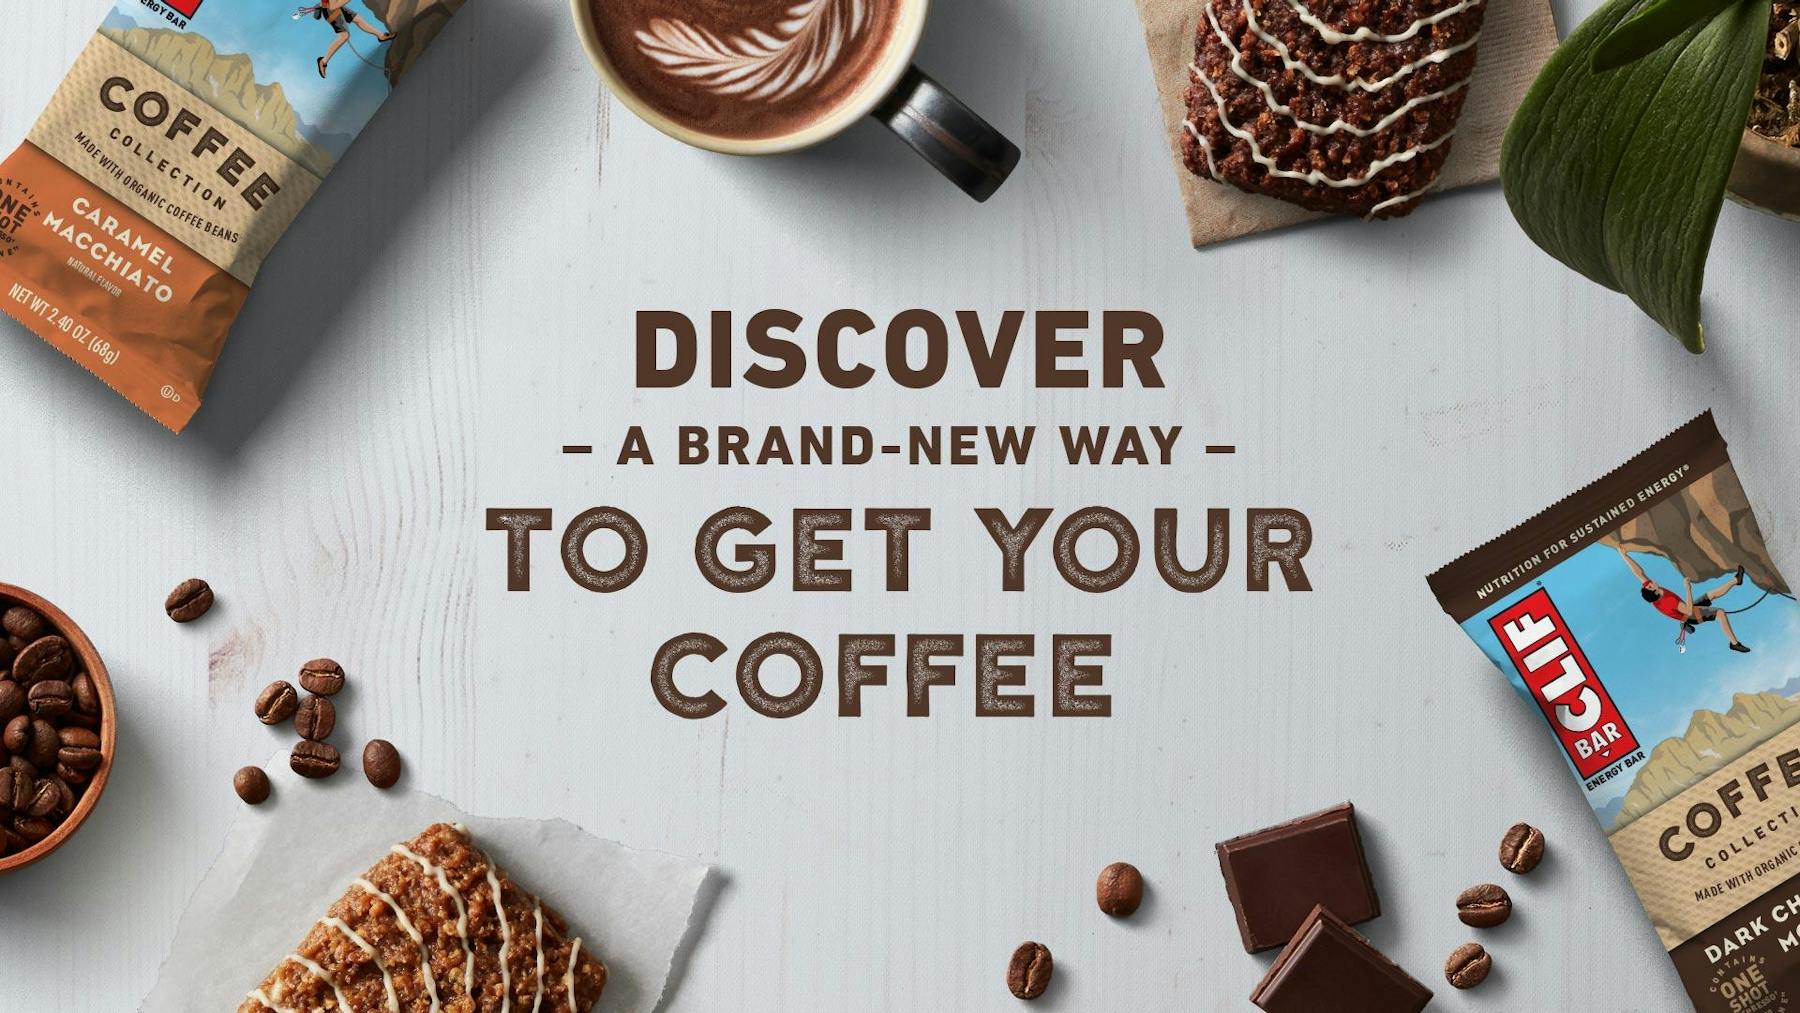 CLIF Bar Coffee Collection: Discover a new way to get your coffee